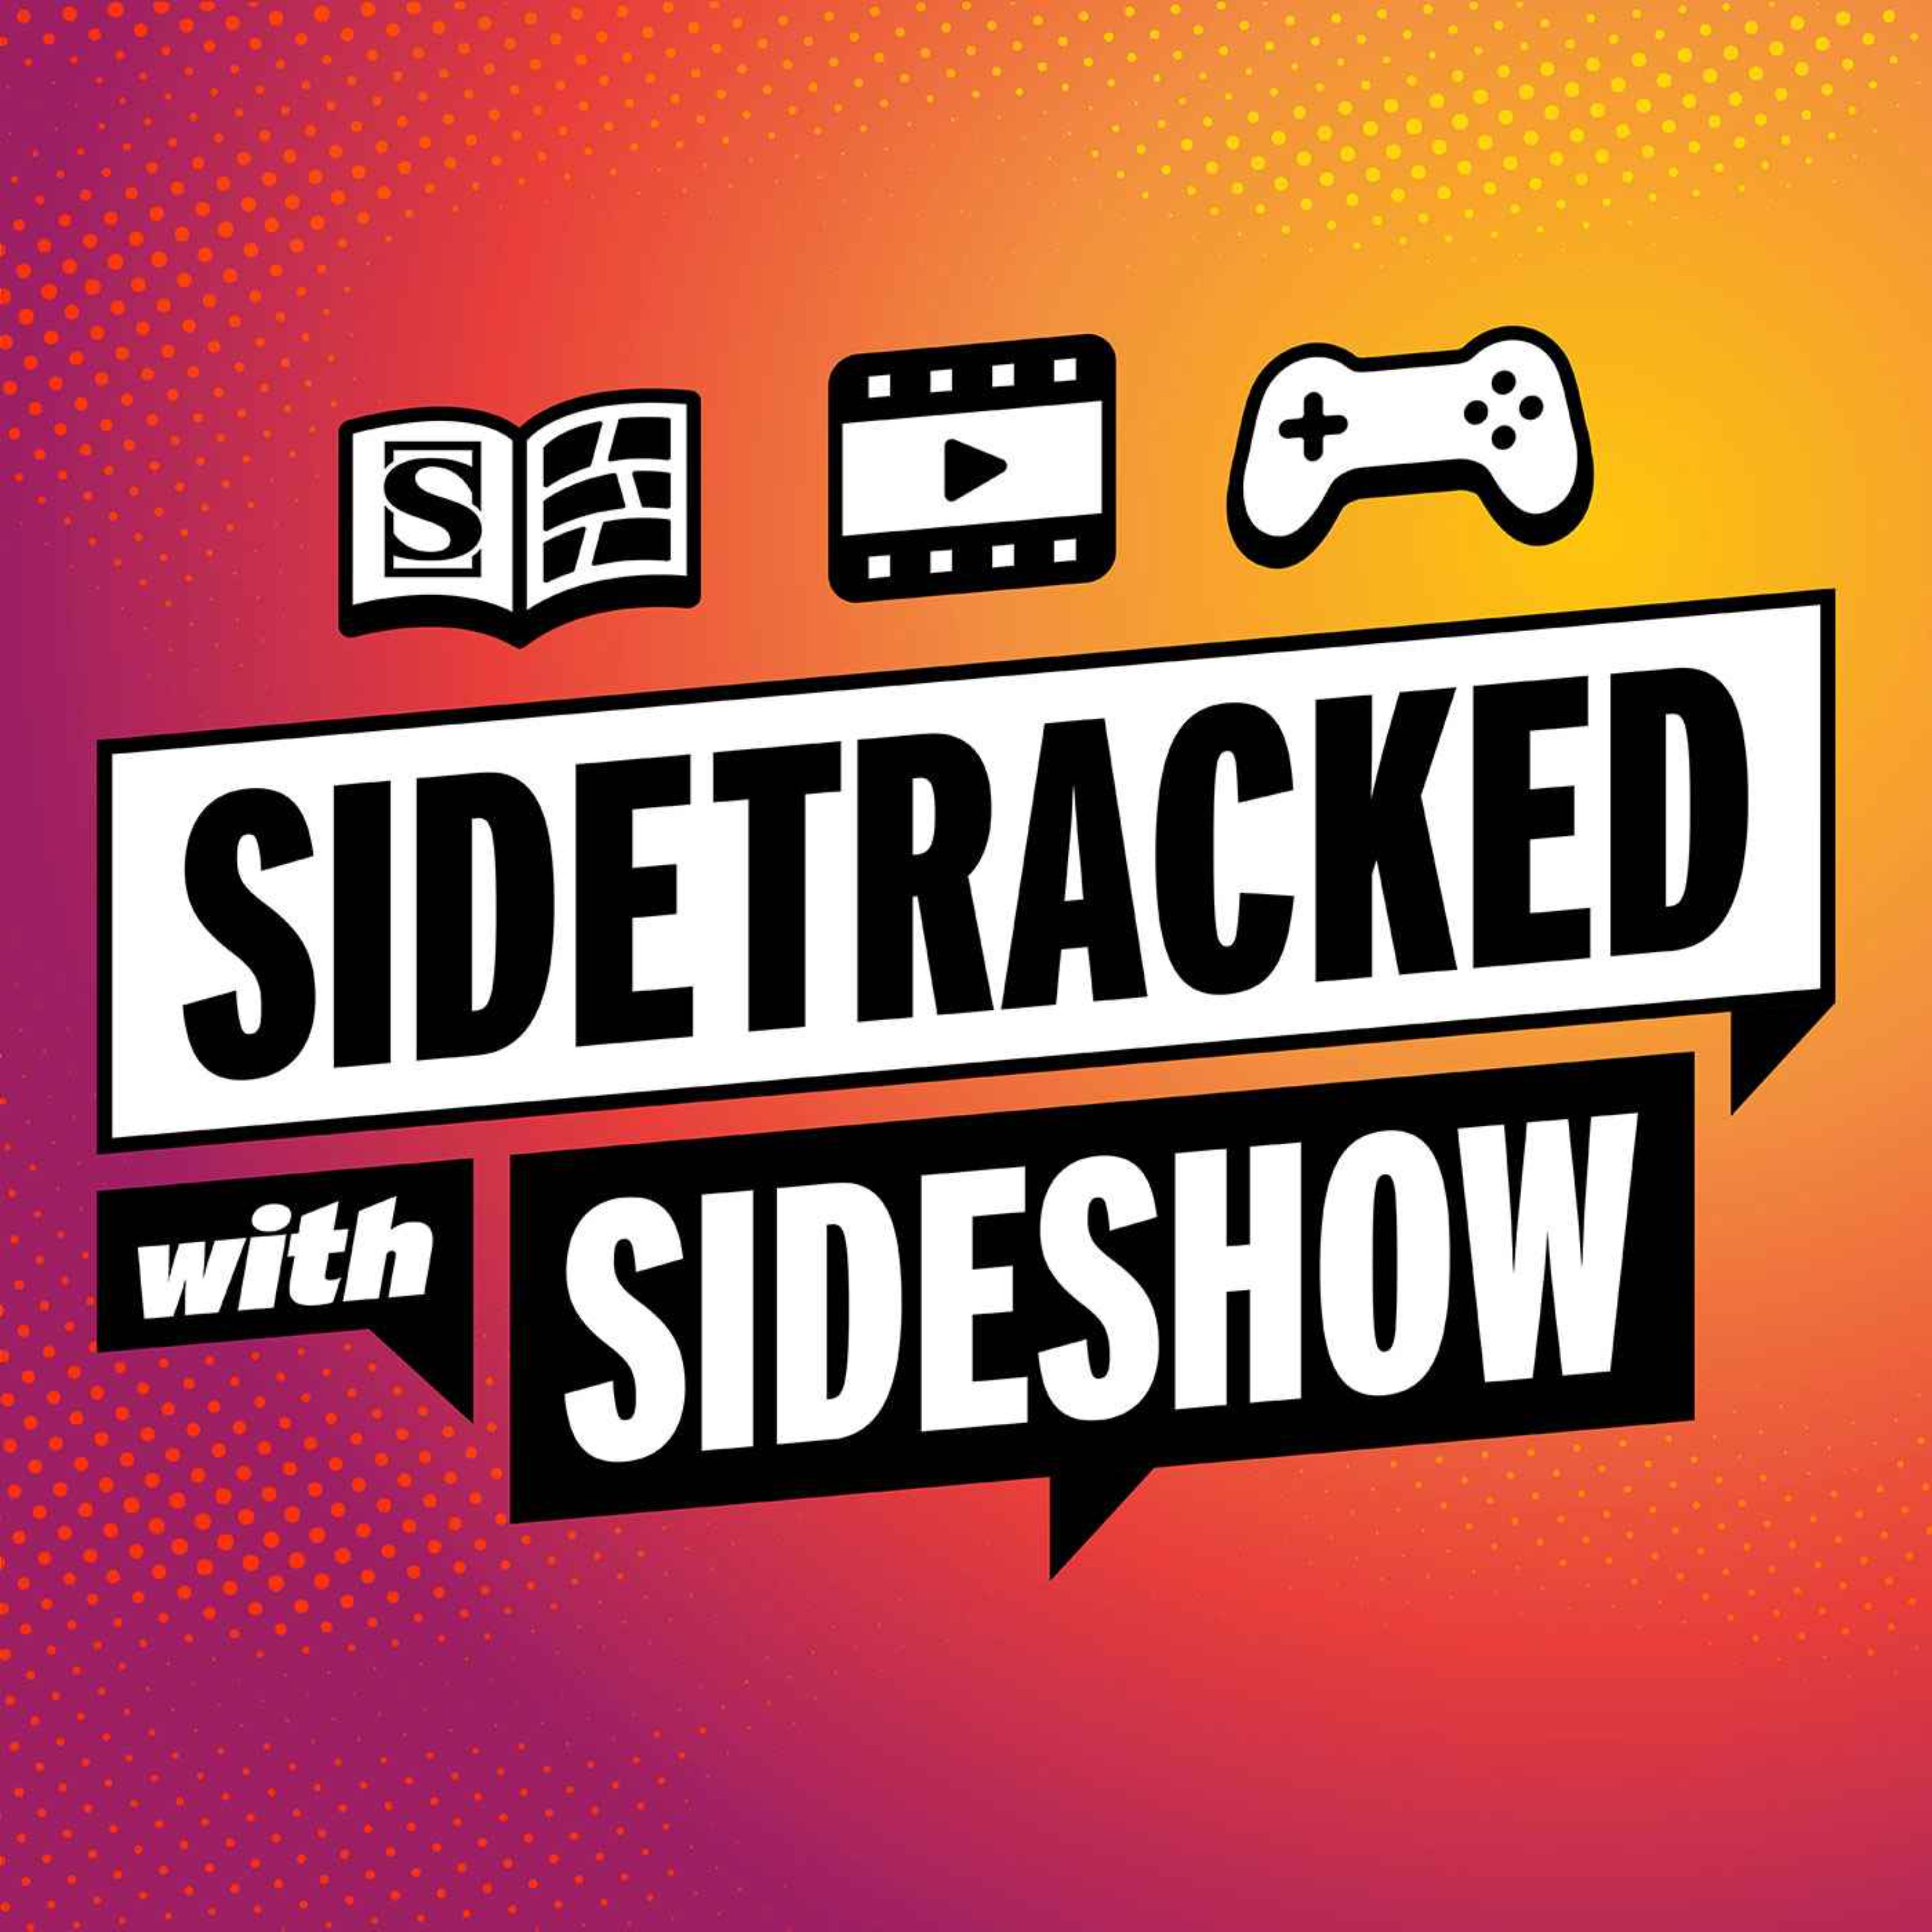 Sidetracked with Sideshow